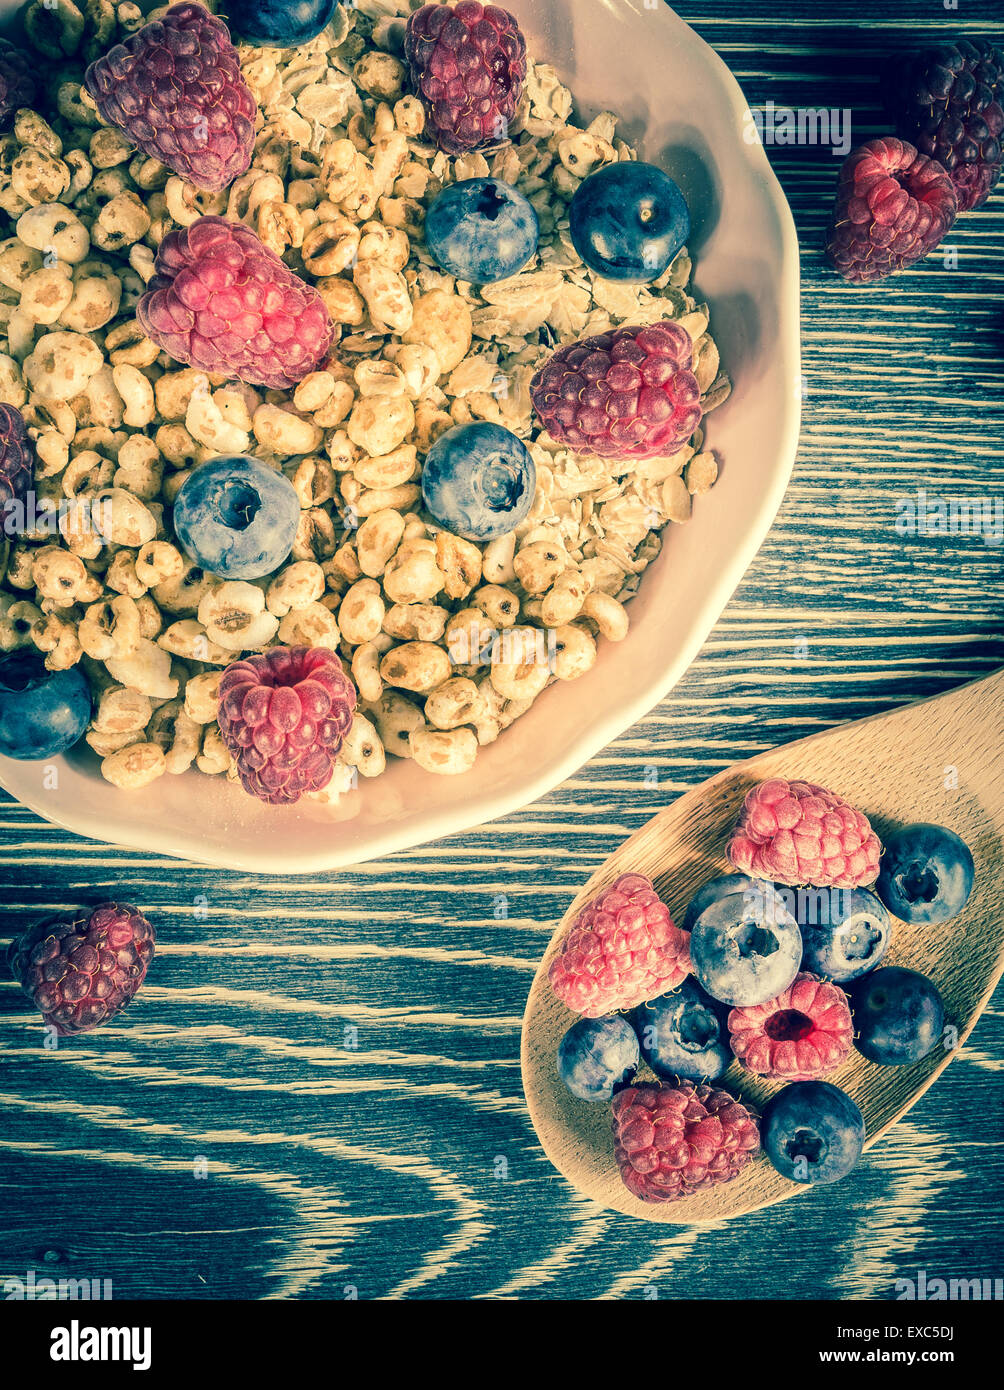 Cereal and fresh fruits arranged on a wooden table Stock Photo